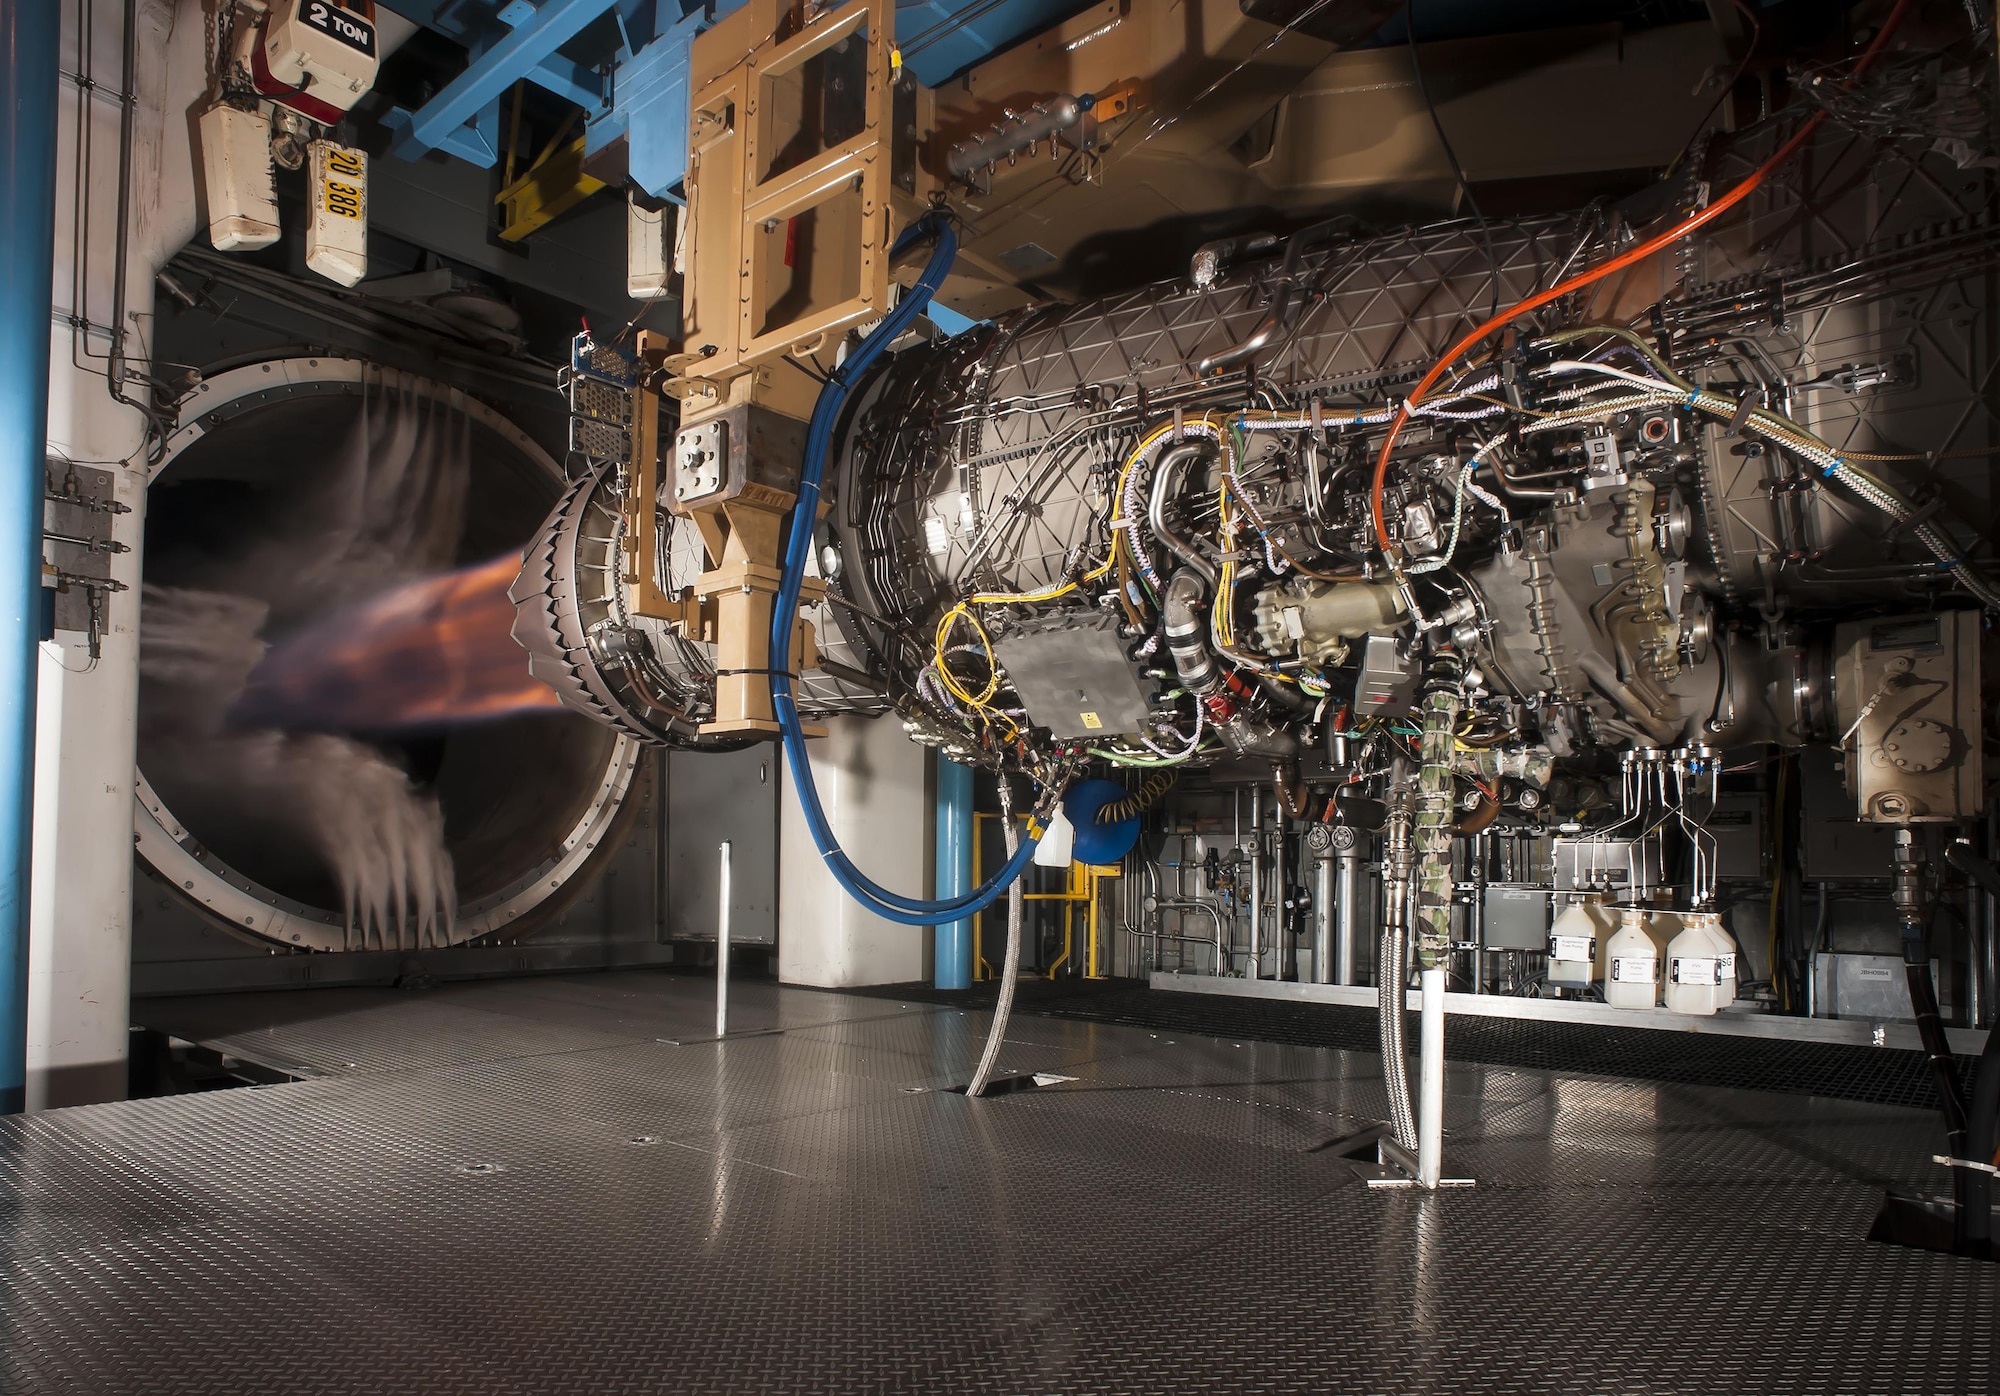 Pratt & Whitney’s F135 engine, used in the F-35 Lightning II, successfully demonstrated hot-life capability during accelerated mission testing at AEDC. Pictured here is the engine during testing in the Engine Test Facility’s sea level 2 test cell. (Courtesy photo/Rick Goodfriend)